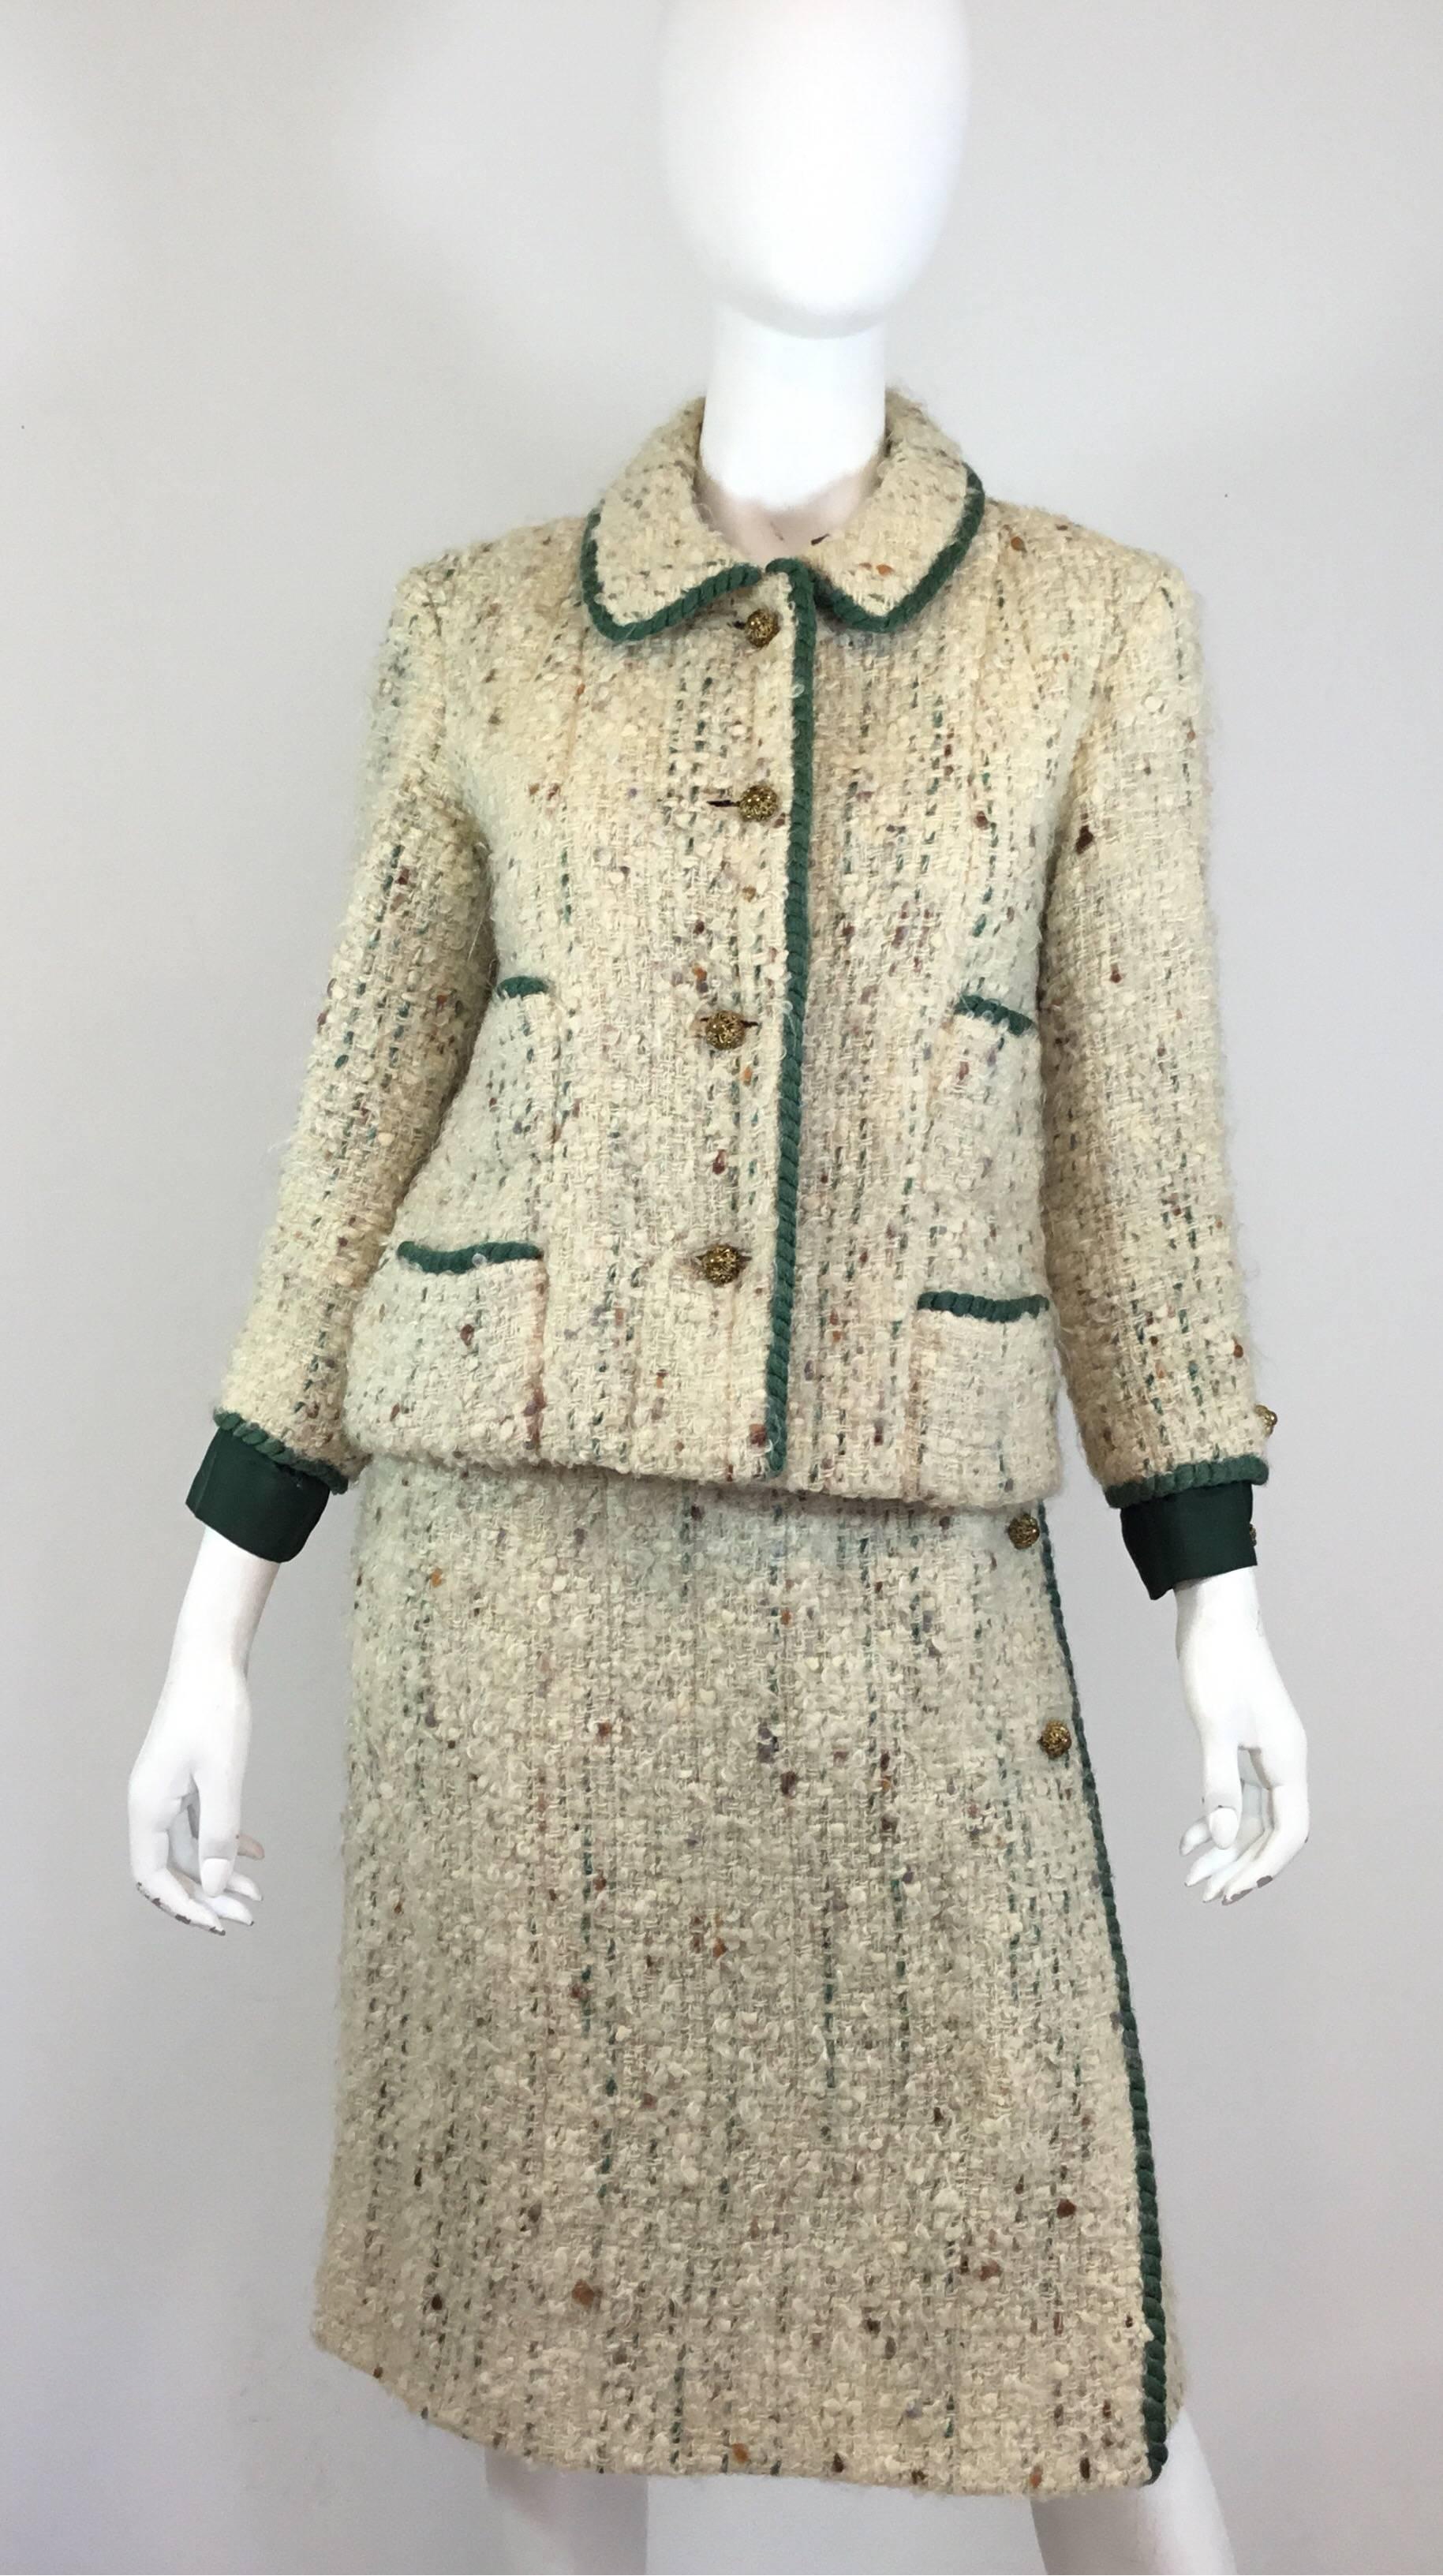 Chanel Couture skirt suit, circa 1950-1960’s. Tweed jacket is featured in an off white tweed knit with a green trim, antique brass hardware button closures, total of four patch pockets, silk cuff and button detail at the sleeves, chain trim along to